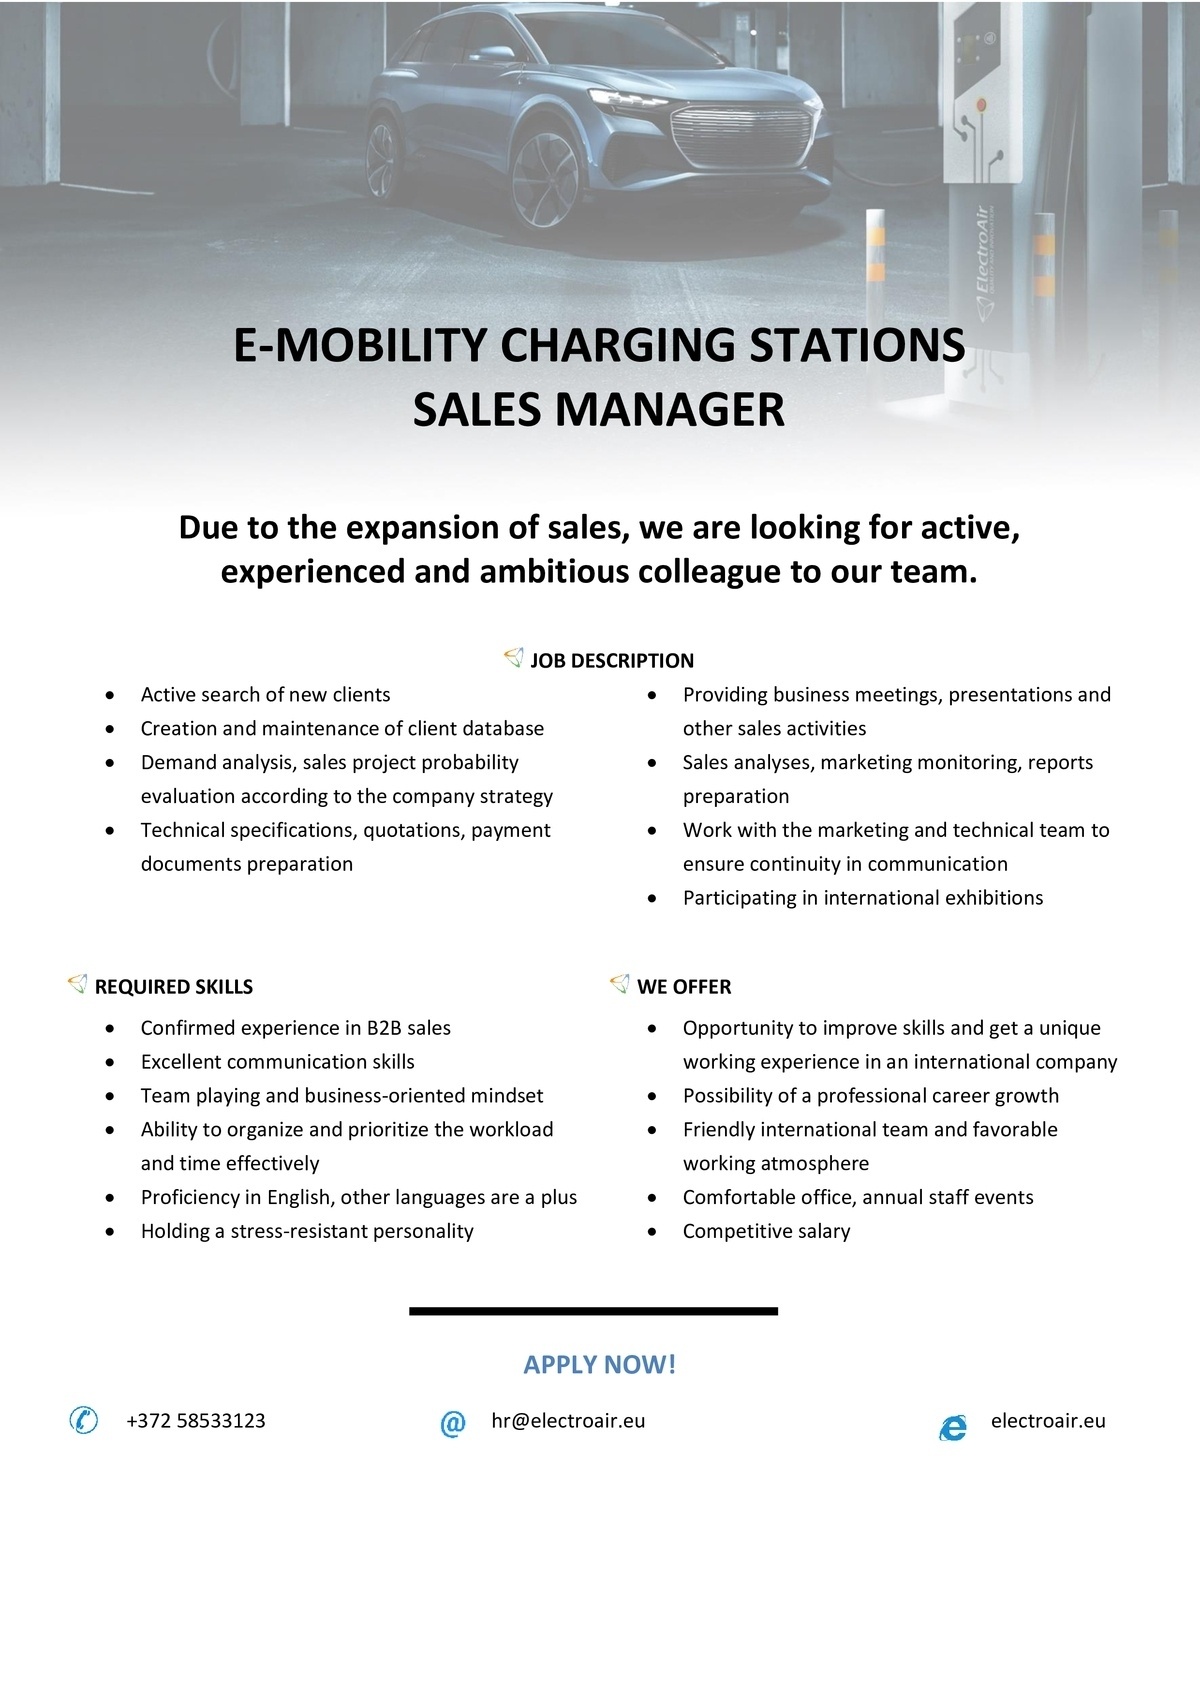 ELECTROAIR OÜ E-MOBILITY CHARGING STATIONS SALES MANAGER